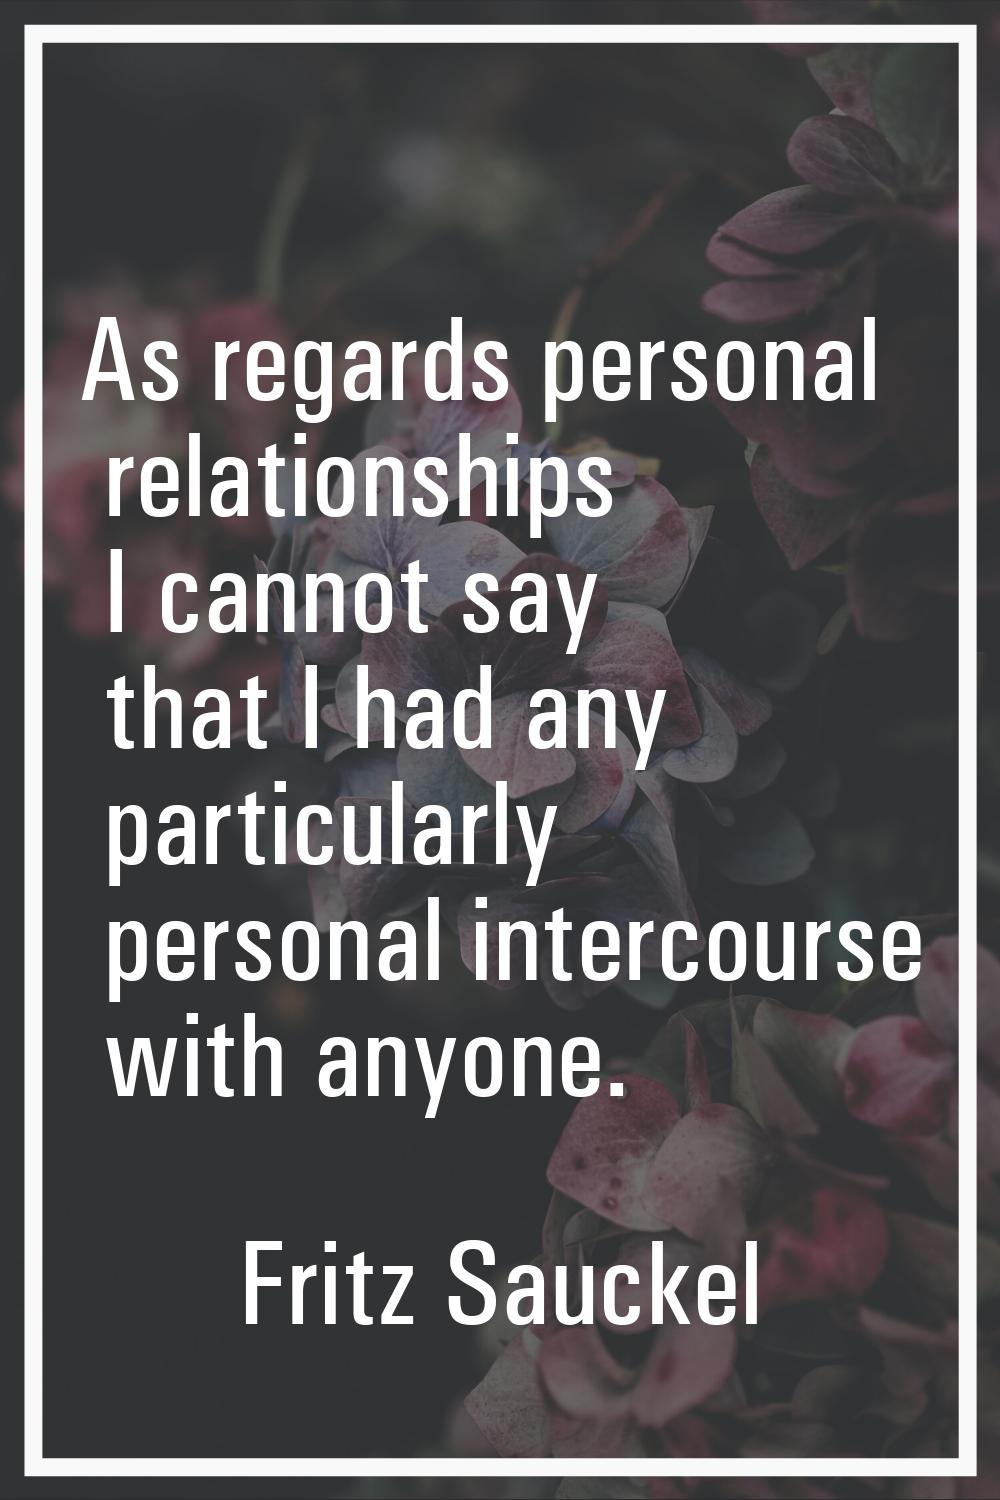 As regards personal relationships I cannot say that I had any particularly personal intercourse wit